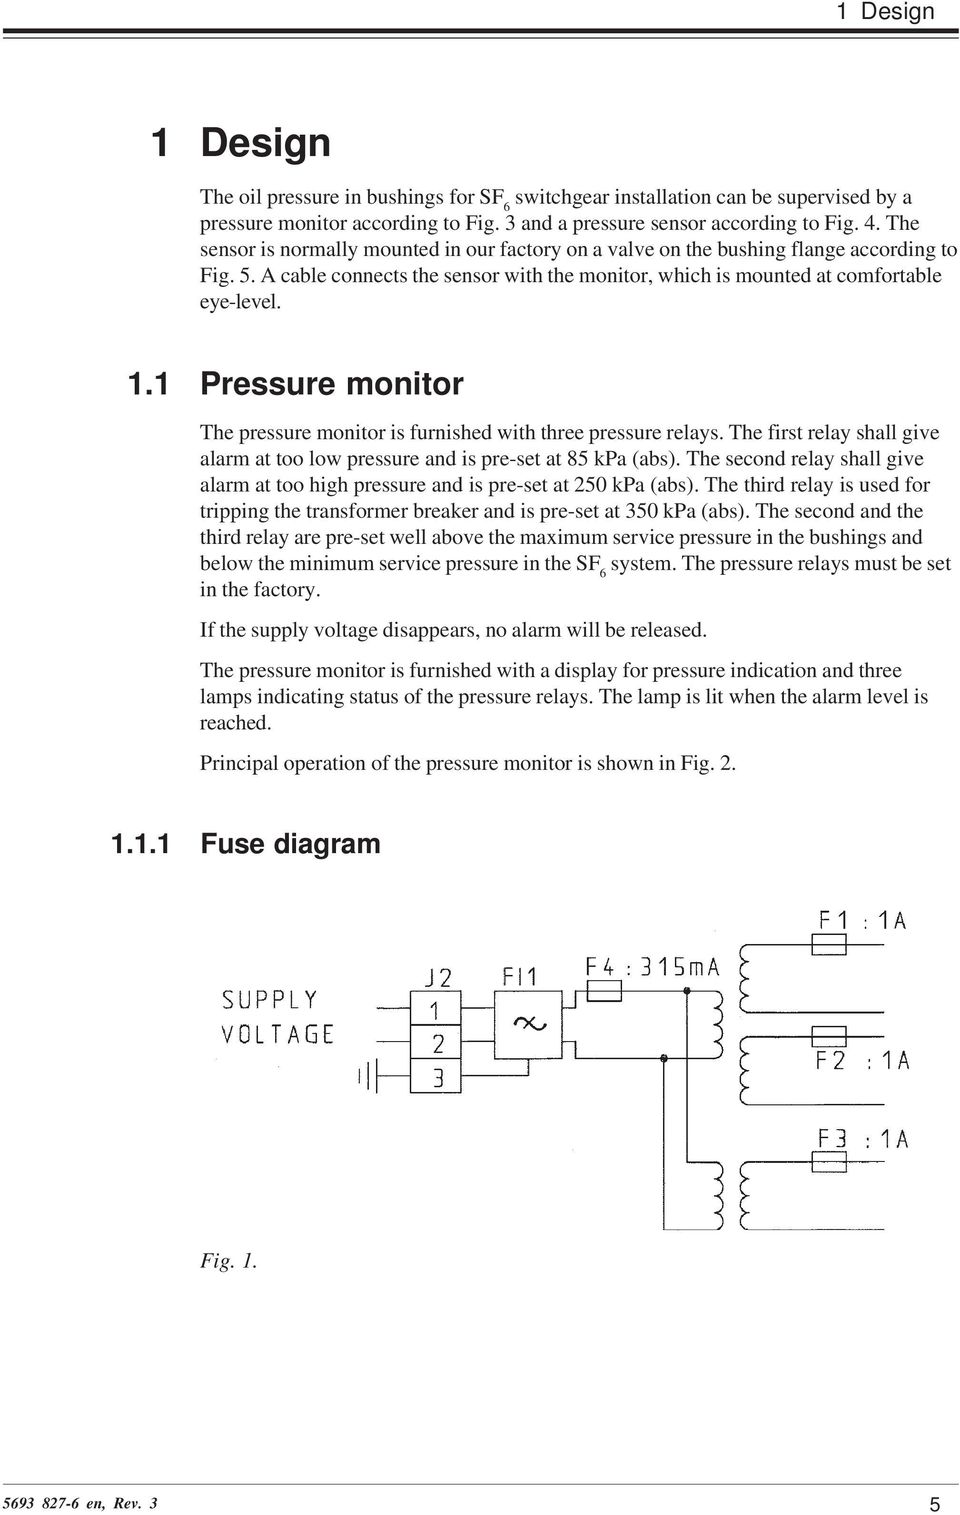 1 Pressure monitor The pressure monitor is furnished with three pressure relays. The first relay shall give alarm at too low pressure and is pre-set at 85 kpa (abs).